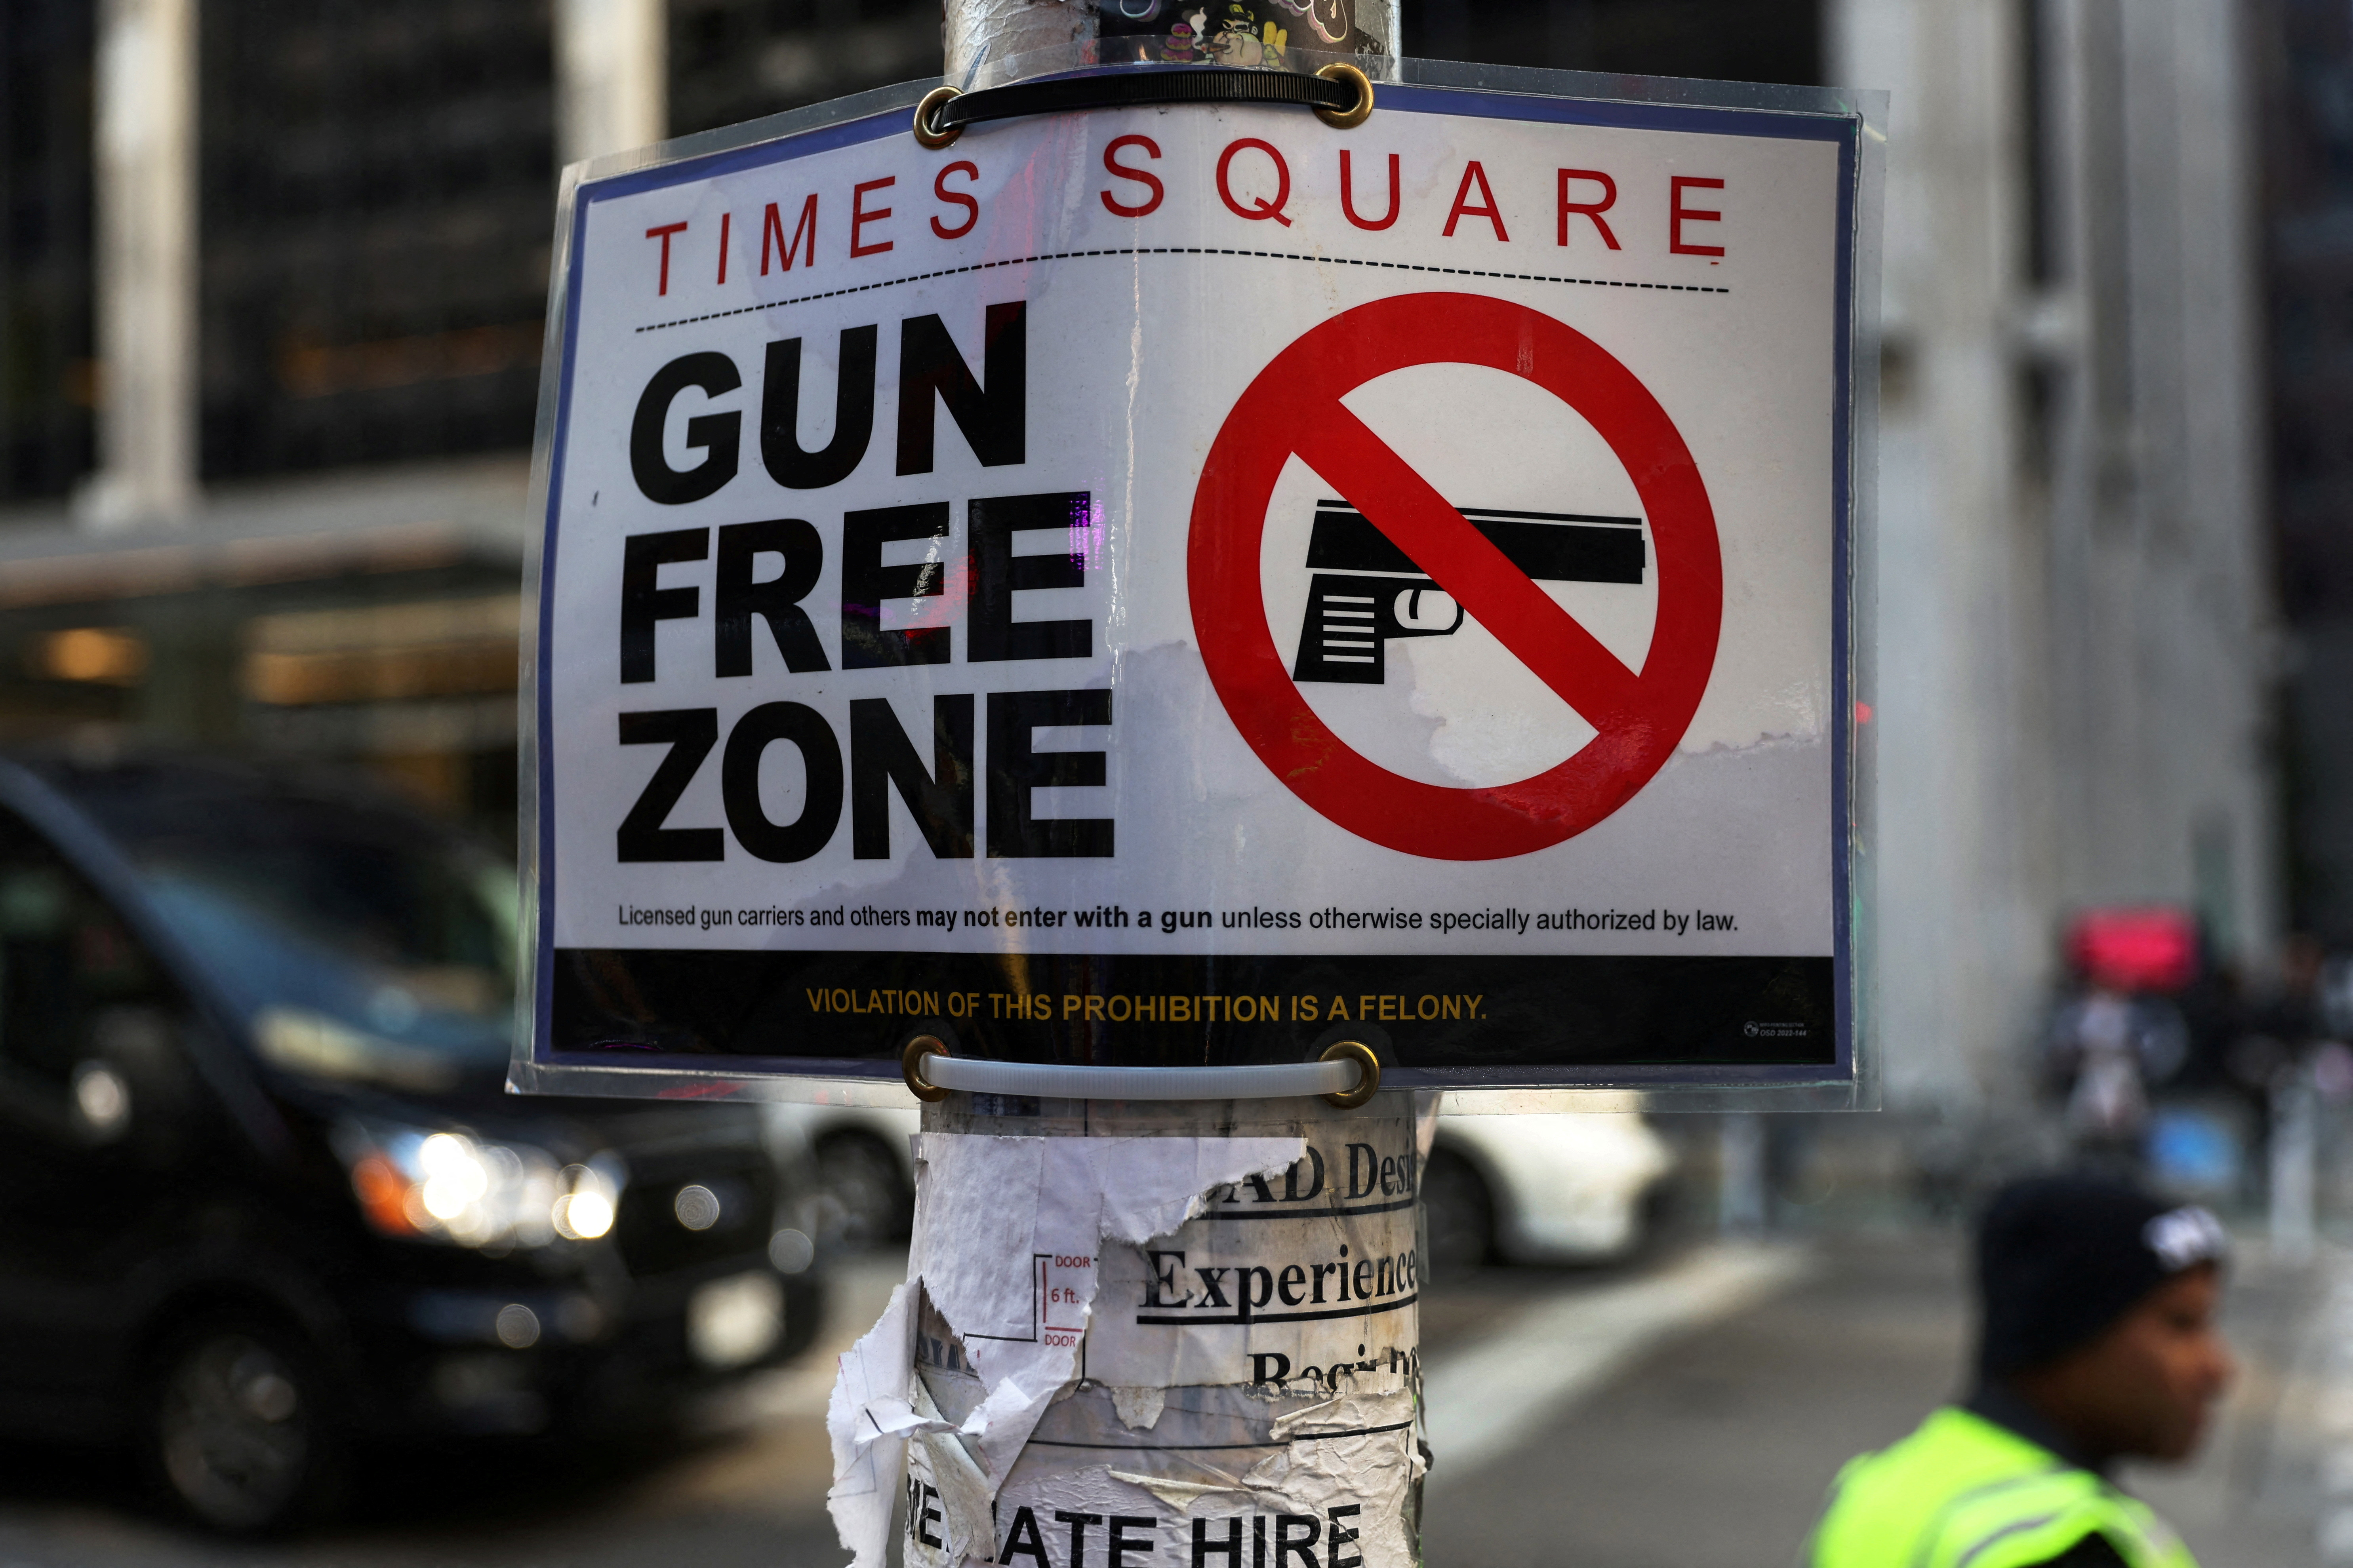 A Times Square Gun Free Zone sign hangs from a light pole on 6th avenue in New York City